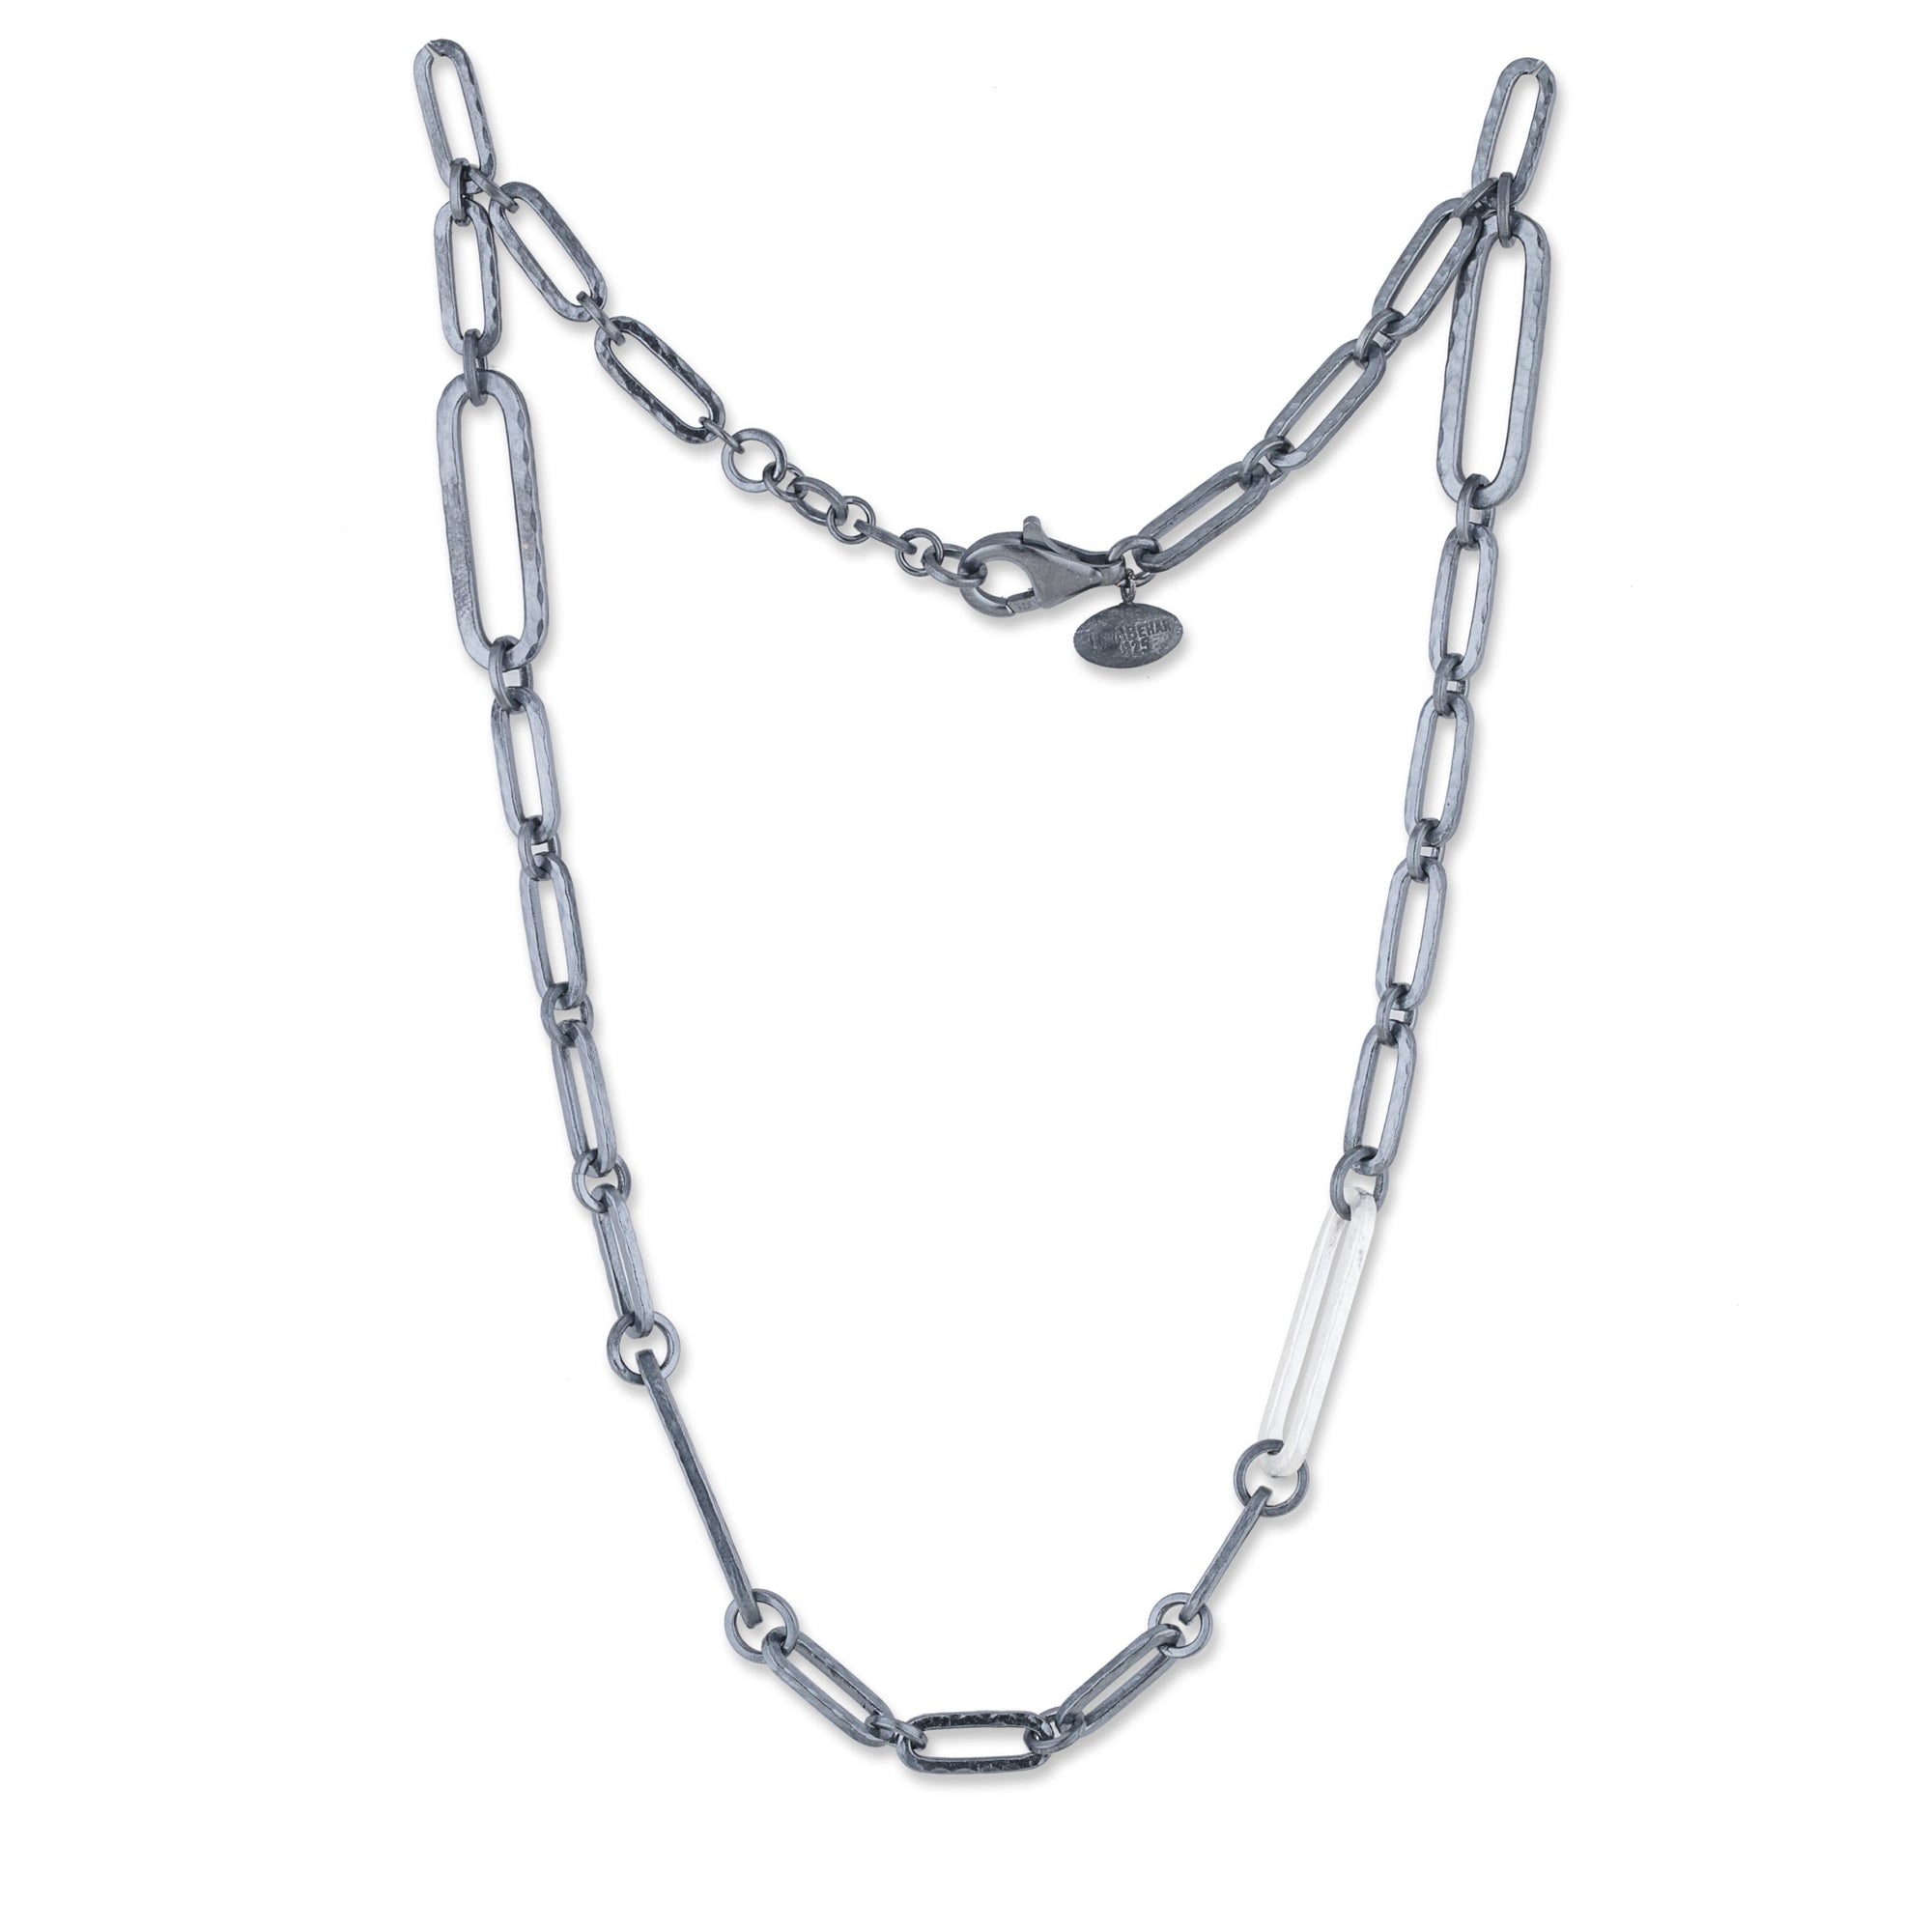 Lika Behar Oxidized Sterling Silver “Chill-Link” Necklace